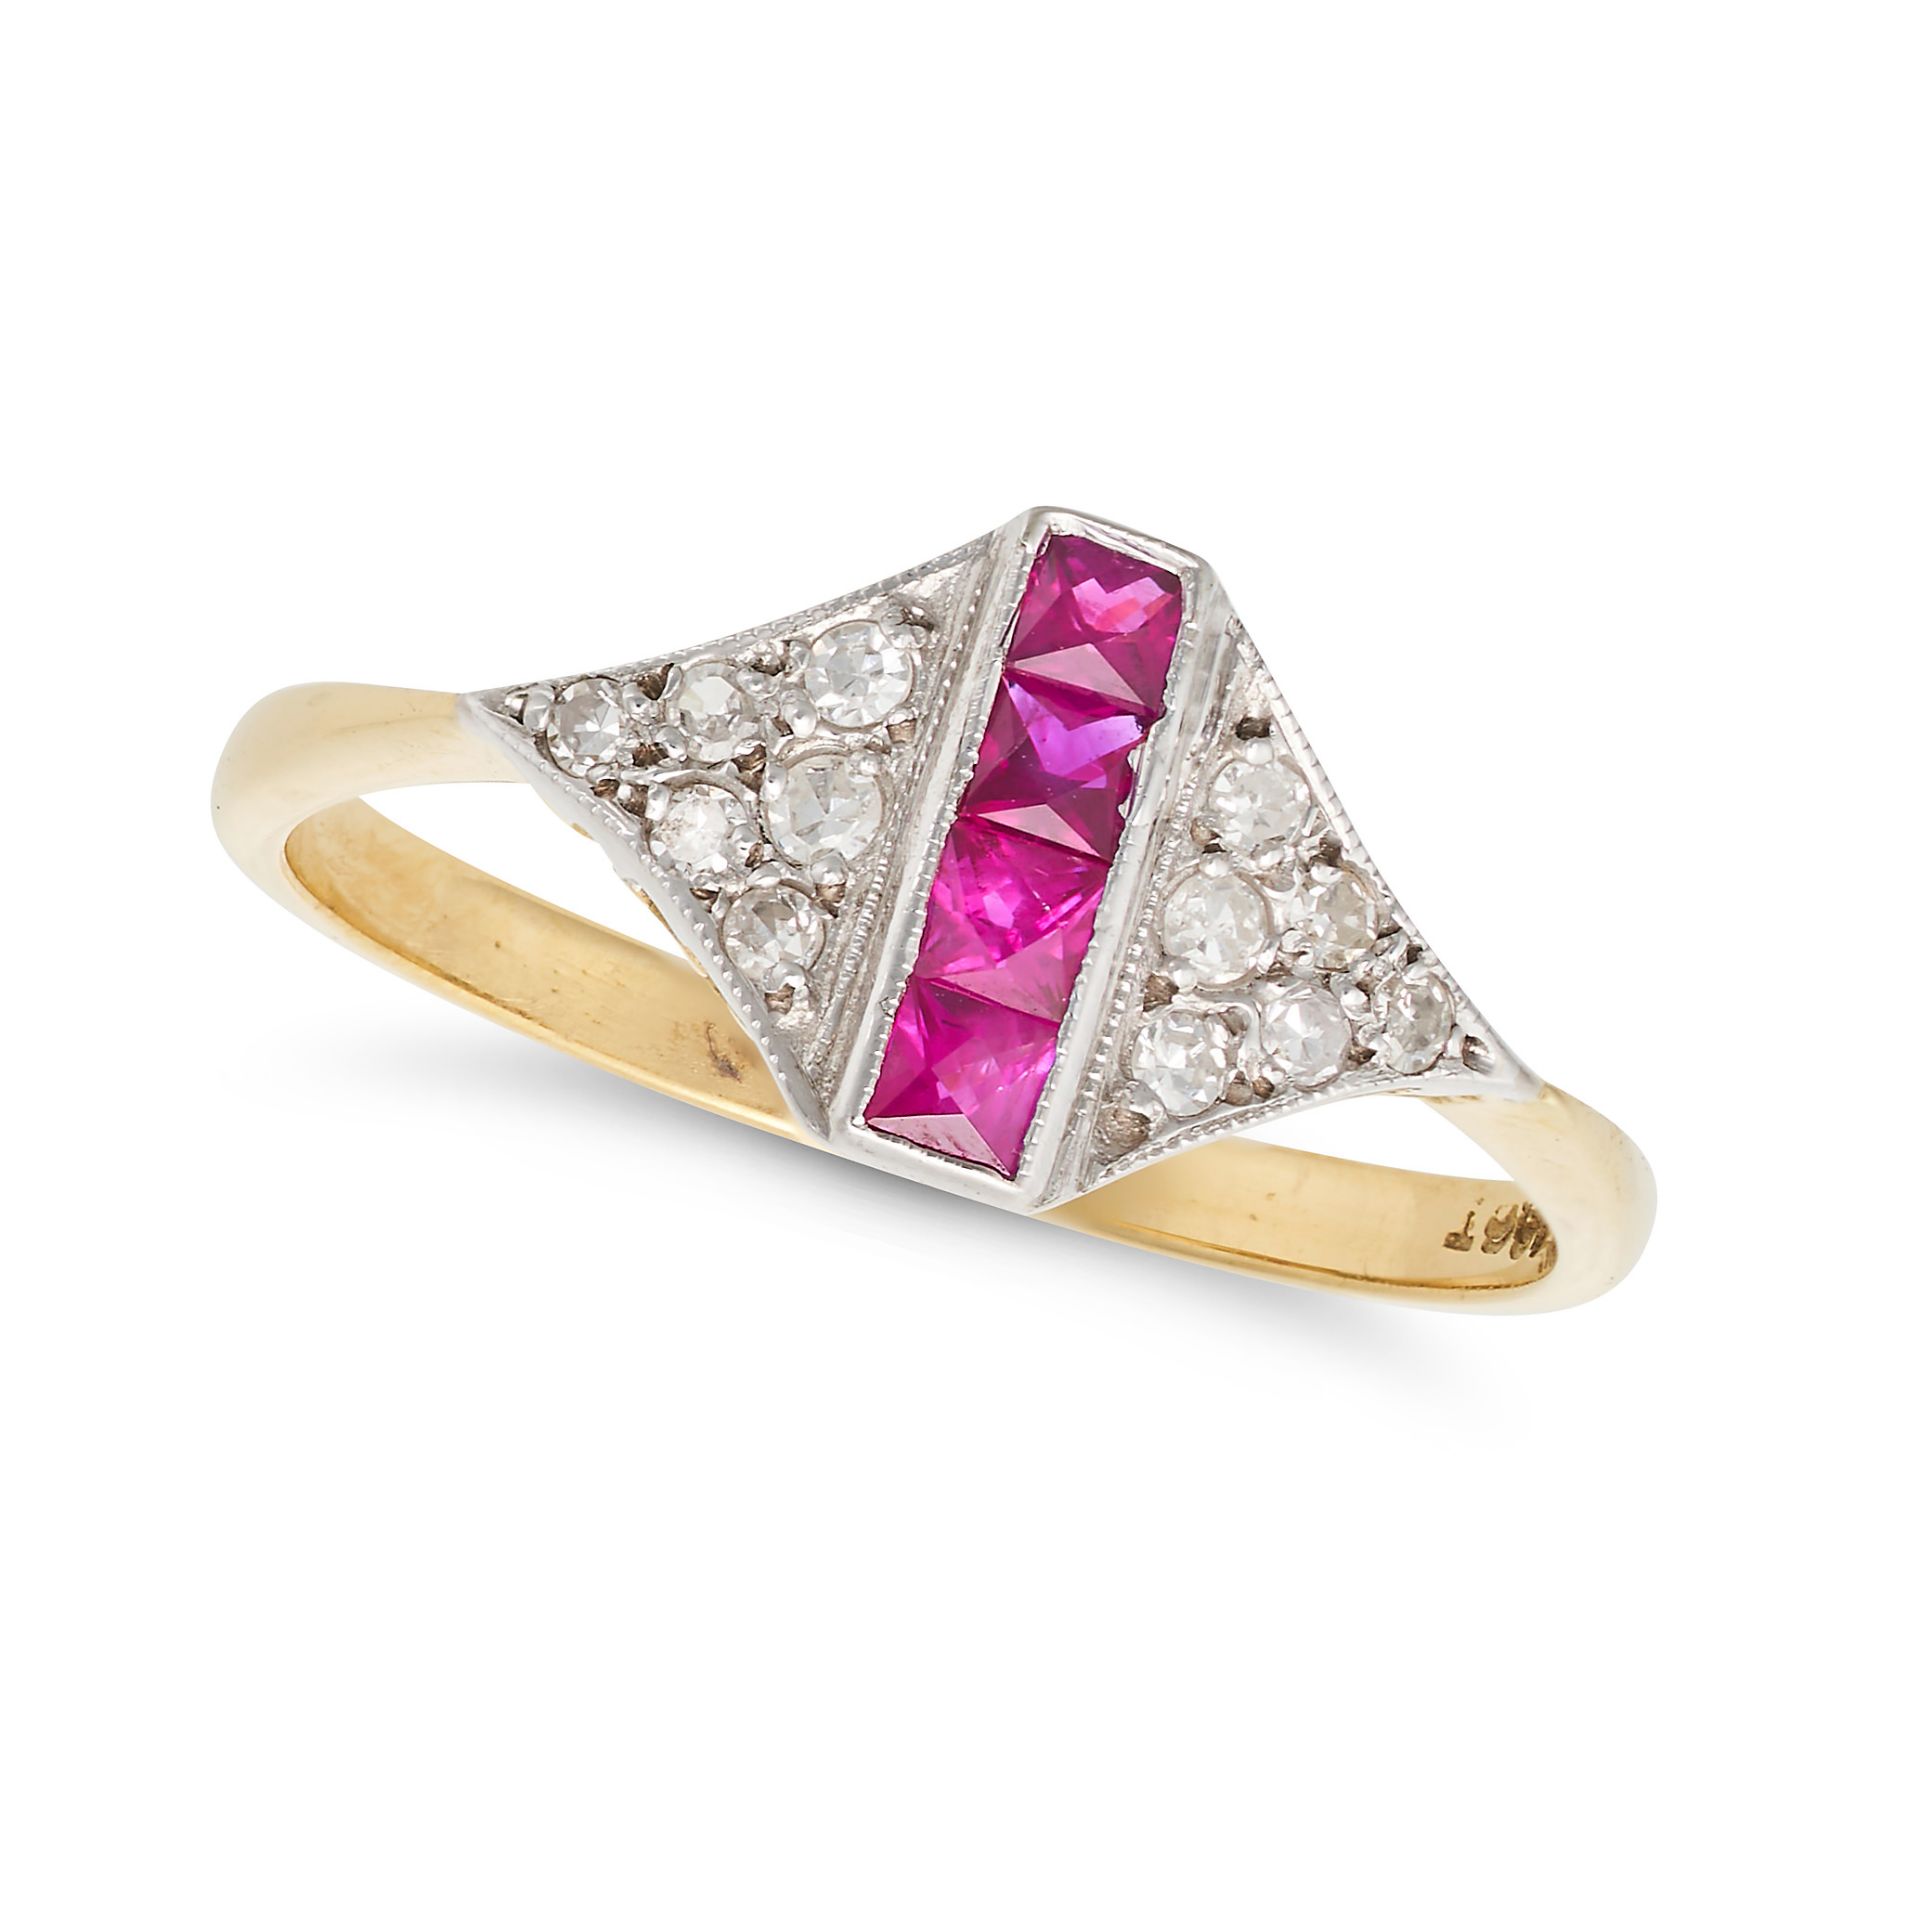 A RUBY AND DIAMOND DRESS RING in 18ct white and yellow gold, set with a row of French cut rubies ...